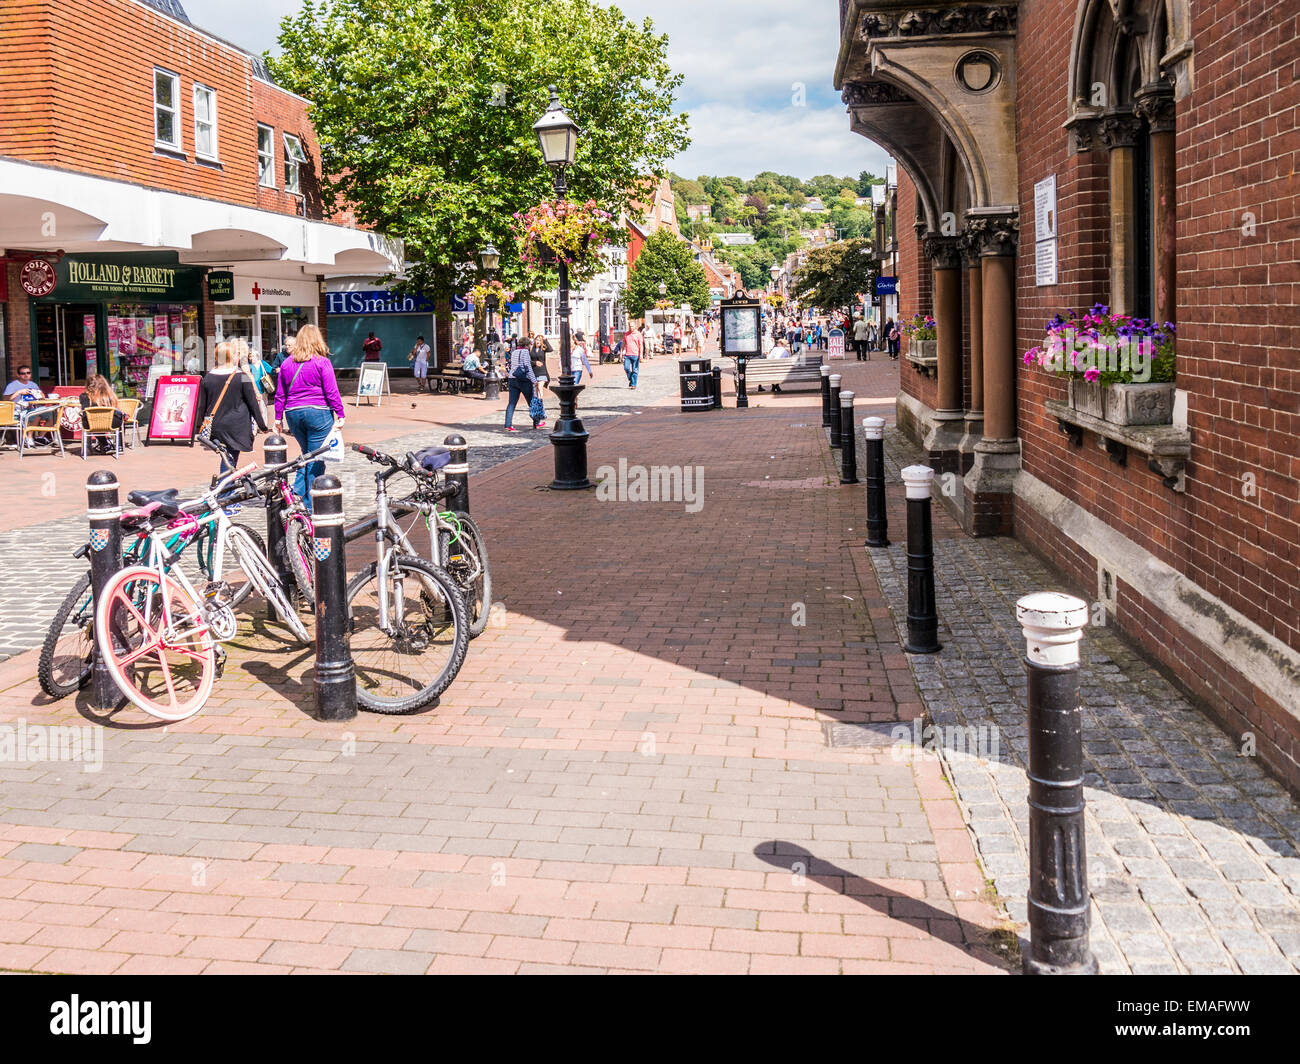 Part of the main High Street in Lewes leading towards the River Ouse & Cliffe High Street, Lewes, East Sussex. Stock Photo